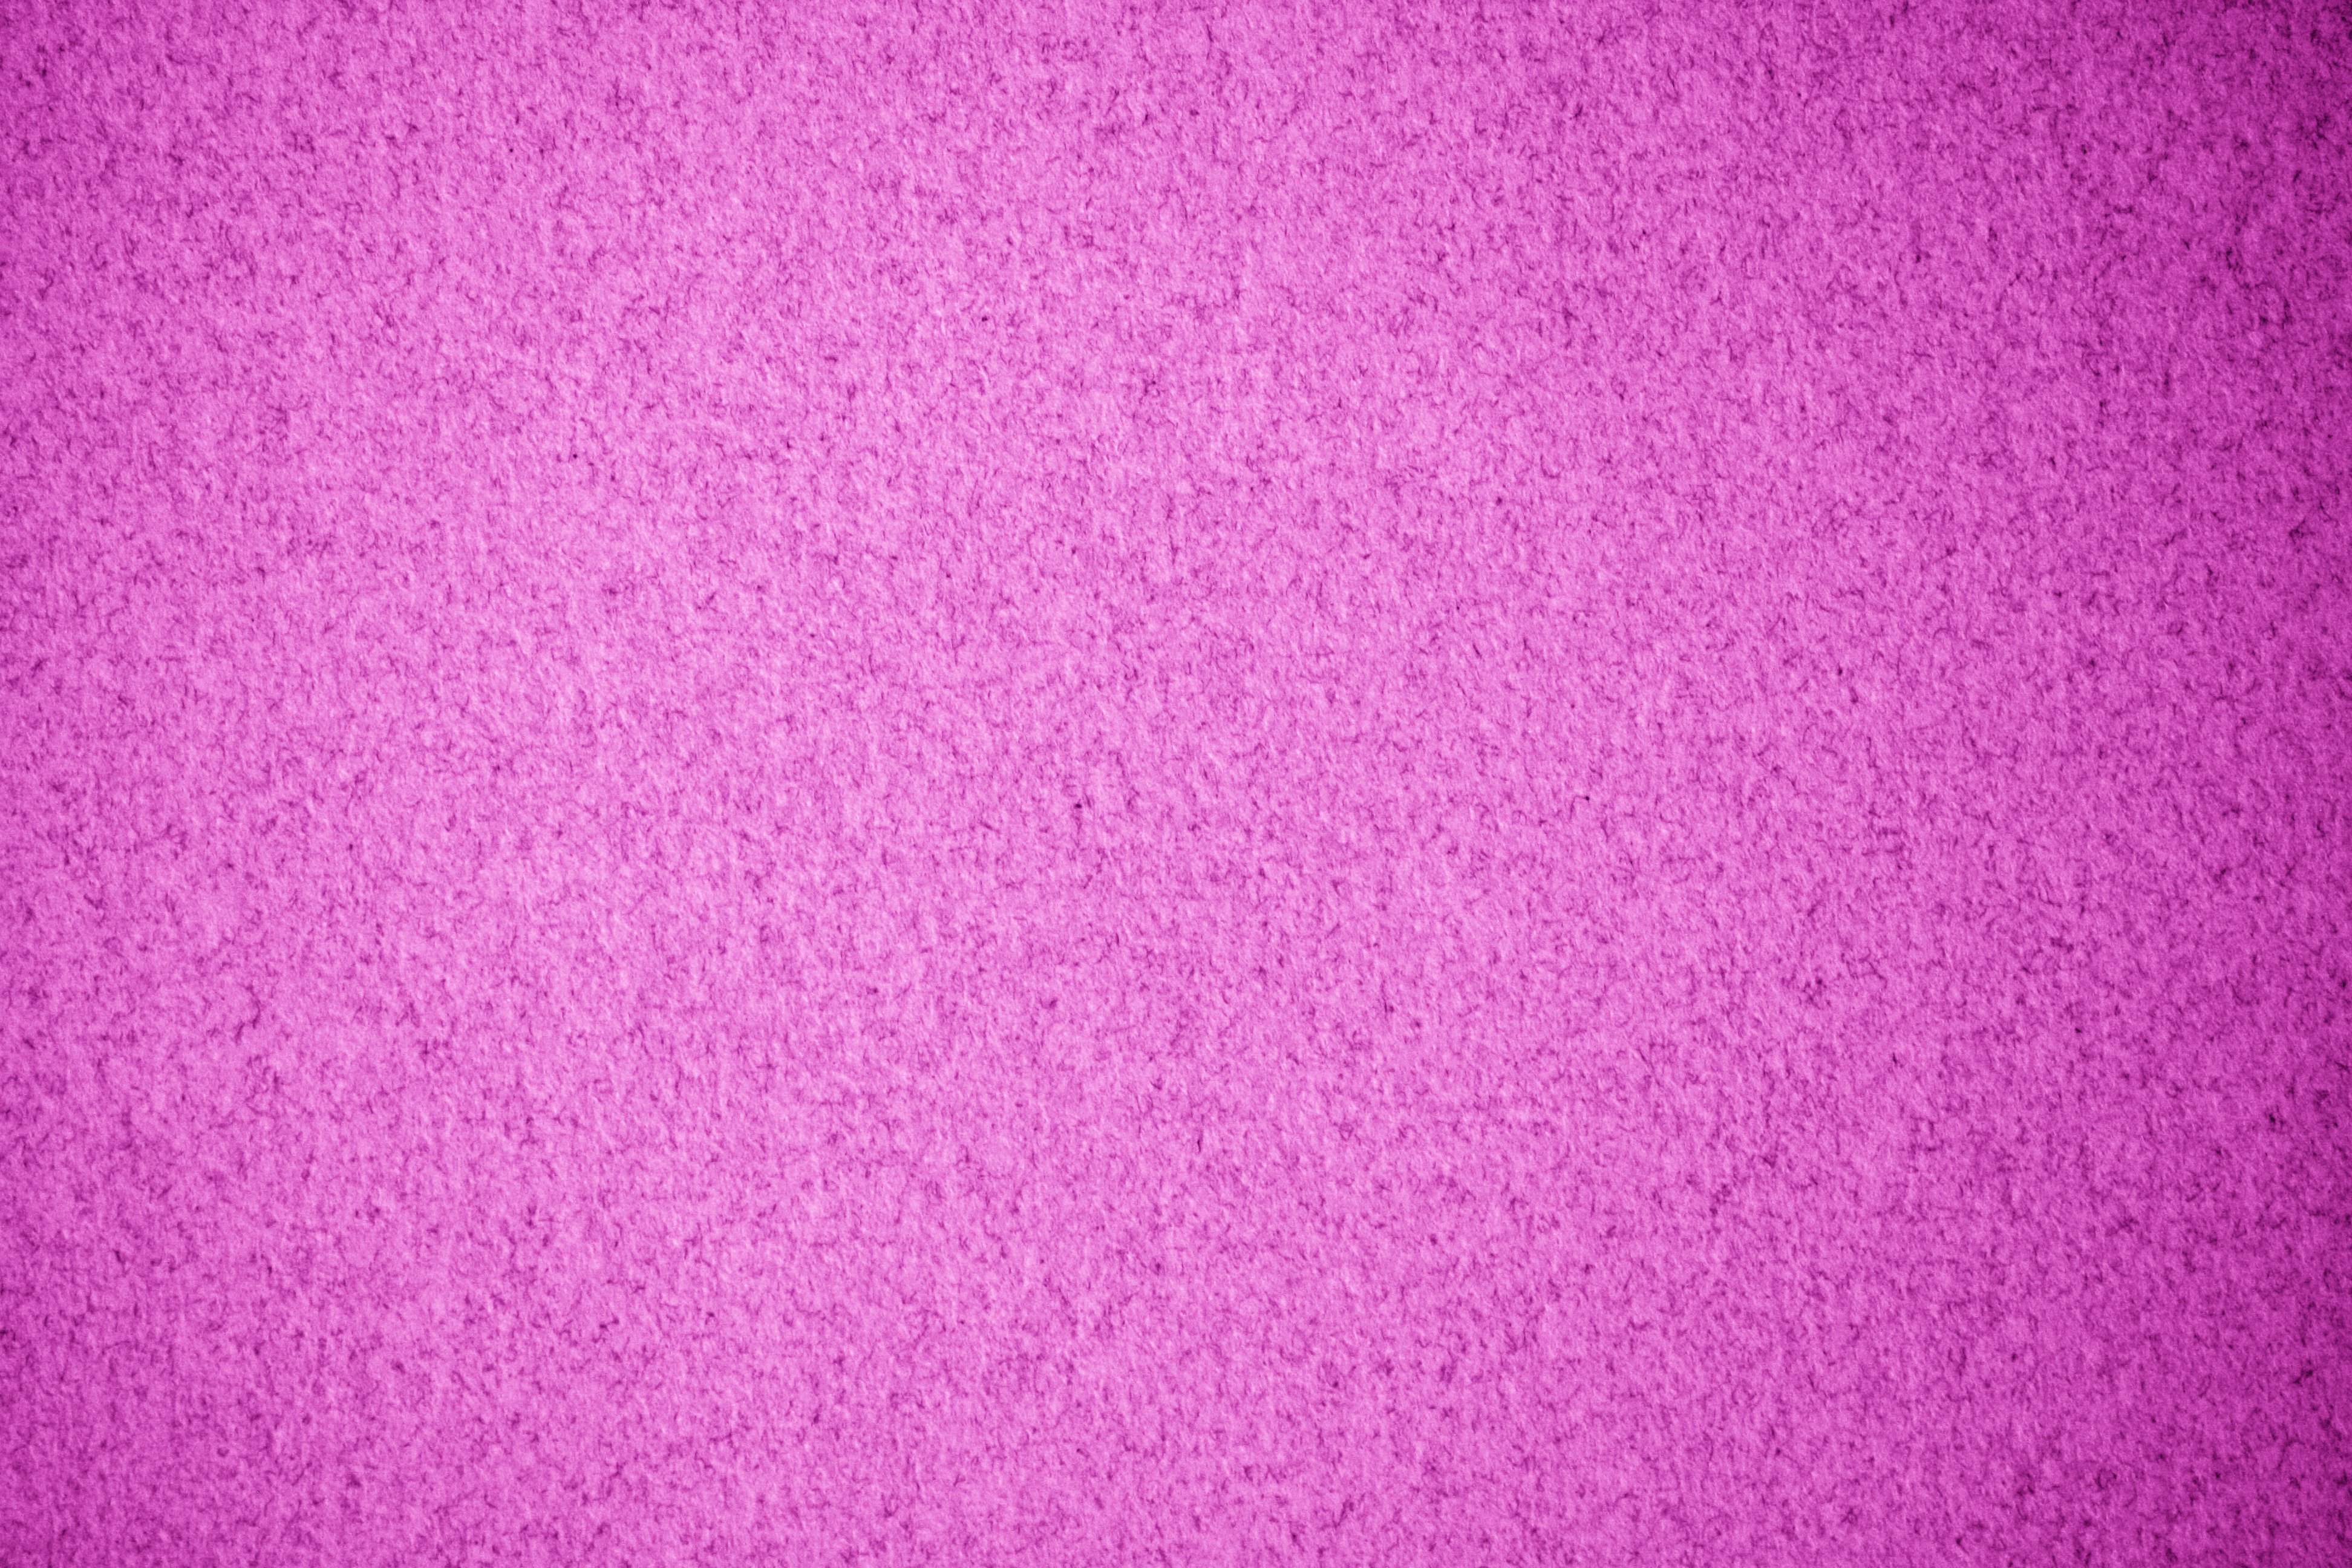 Magenta Hot Pink Card Stock Paper Texture Picture, Free Photograph